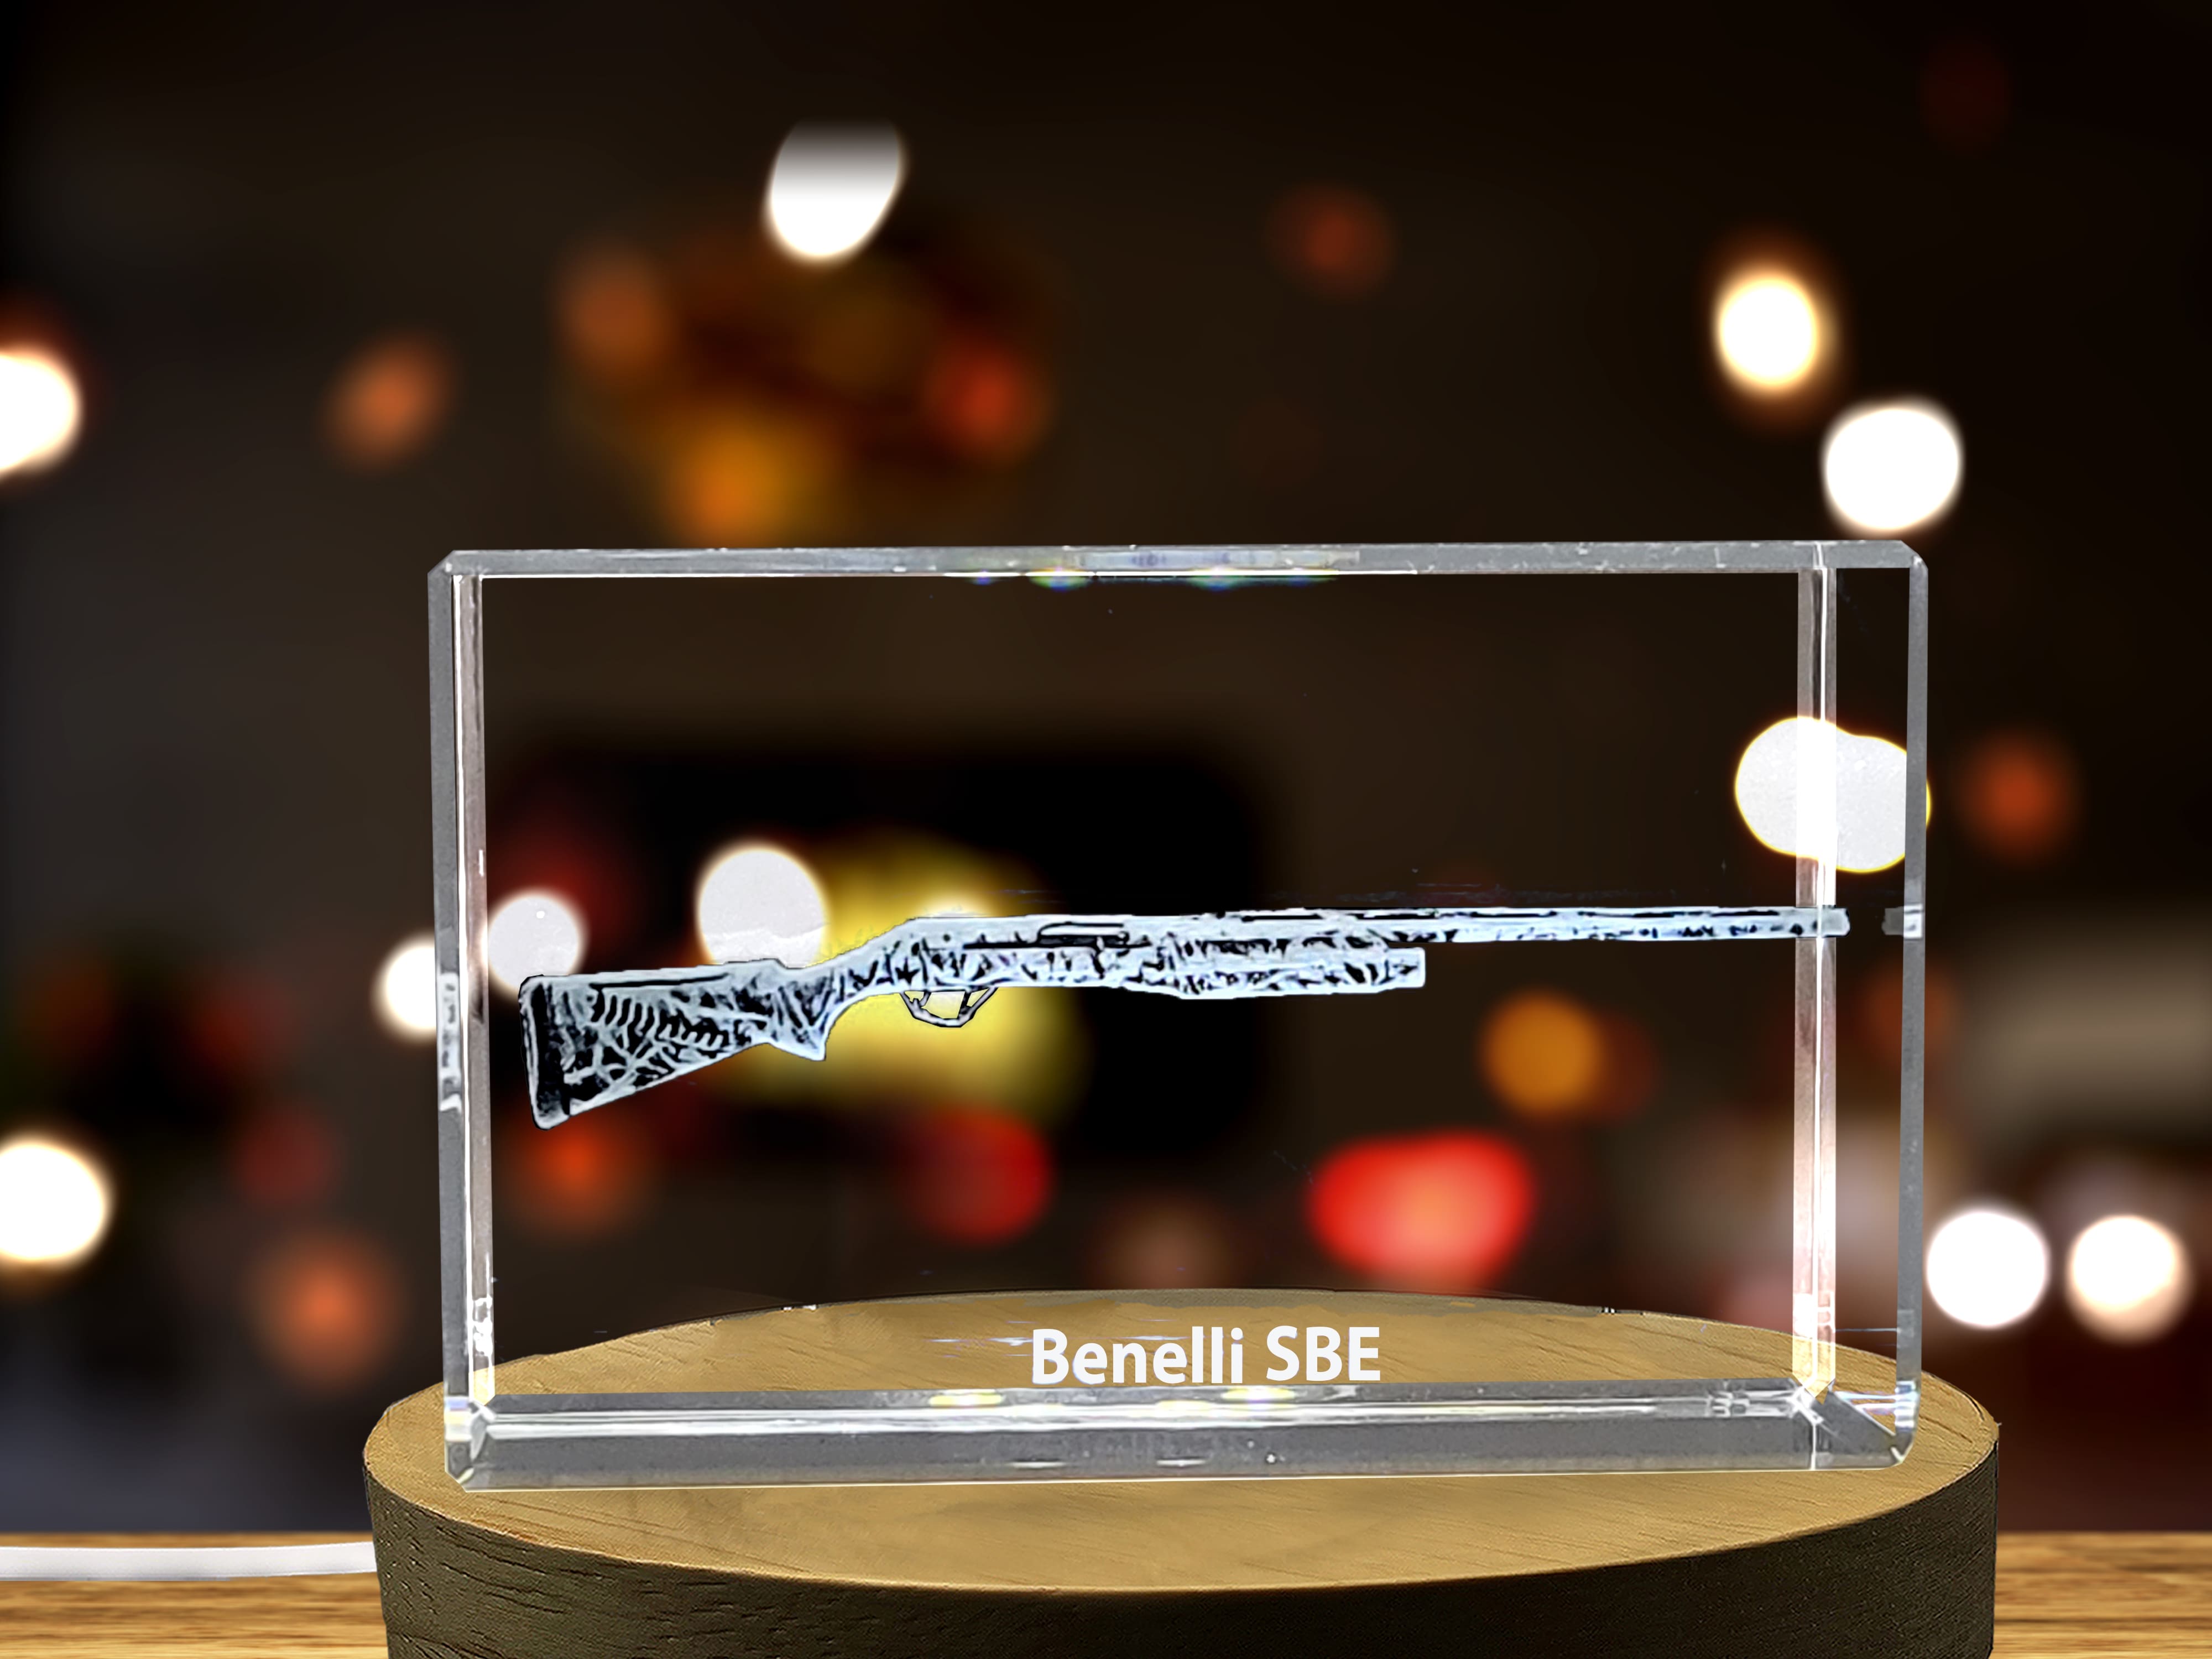 Benelli SBE Semi-Automatic Shotgun Design Laser Engraved Crystal Display A&B Crystal Collection